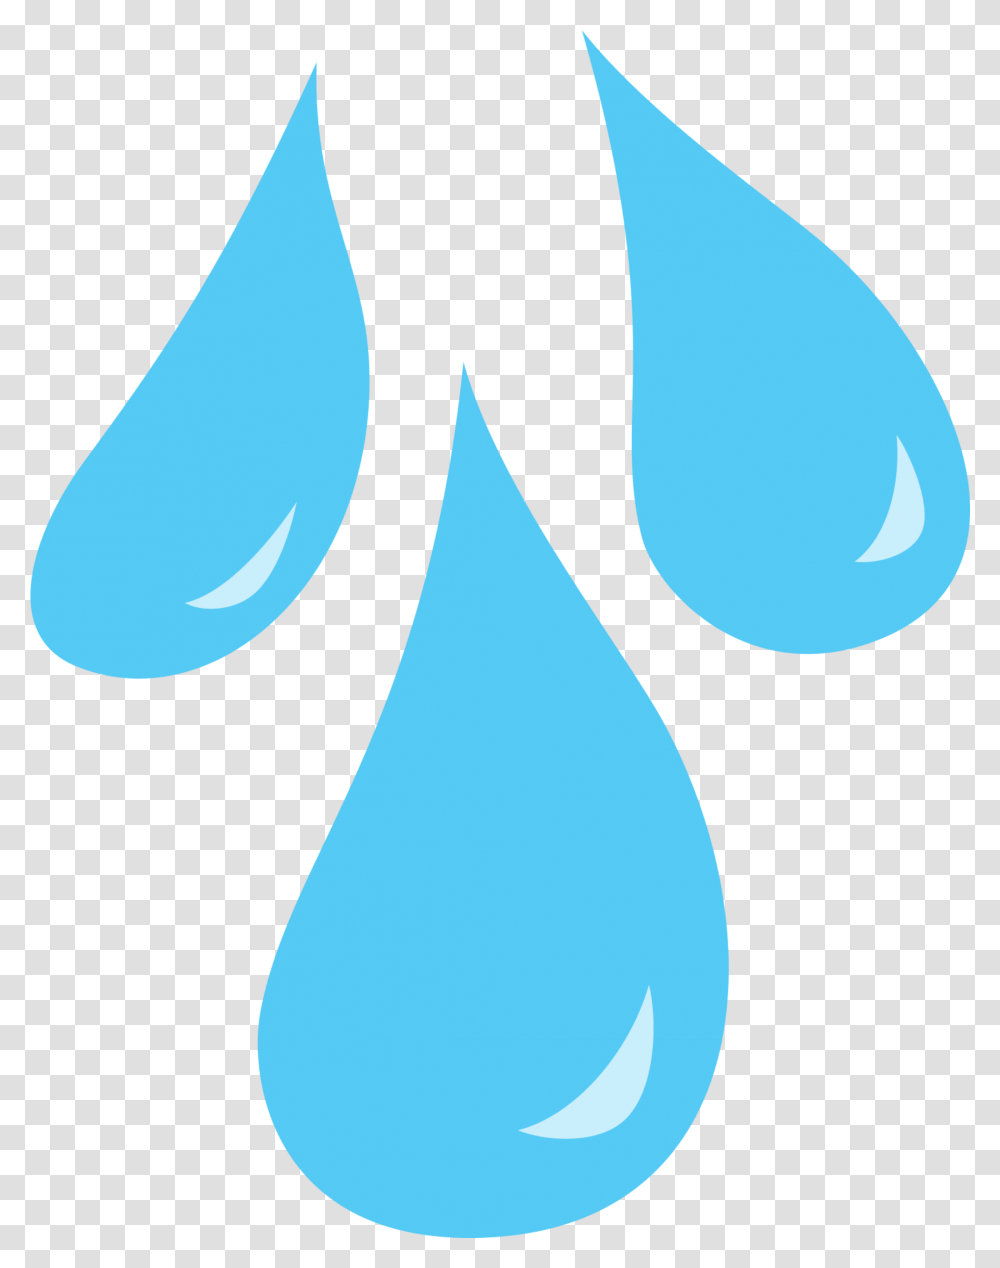 Sweat Drops Clipart The Image Kid Has Water Droplets Clipart, Ornament, Pattern Transparent Png